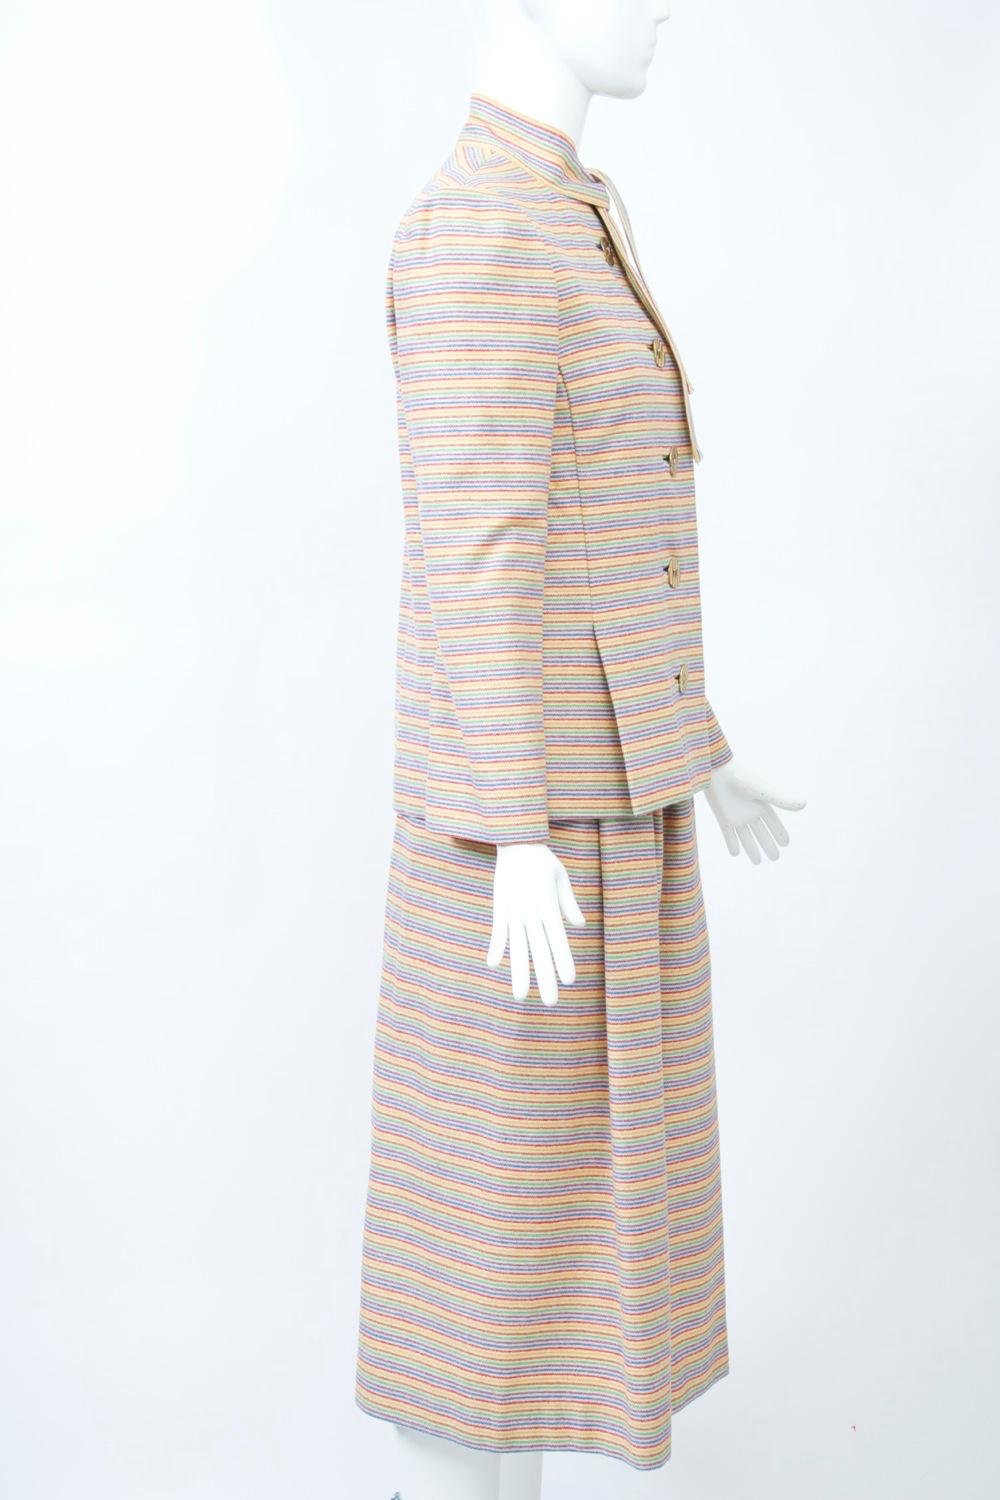 Pauline Trigère Striped Wool Suit In Good Condition In Alford, MA